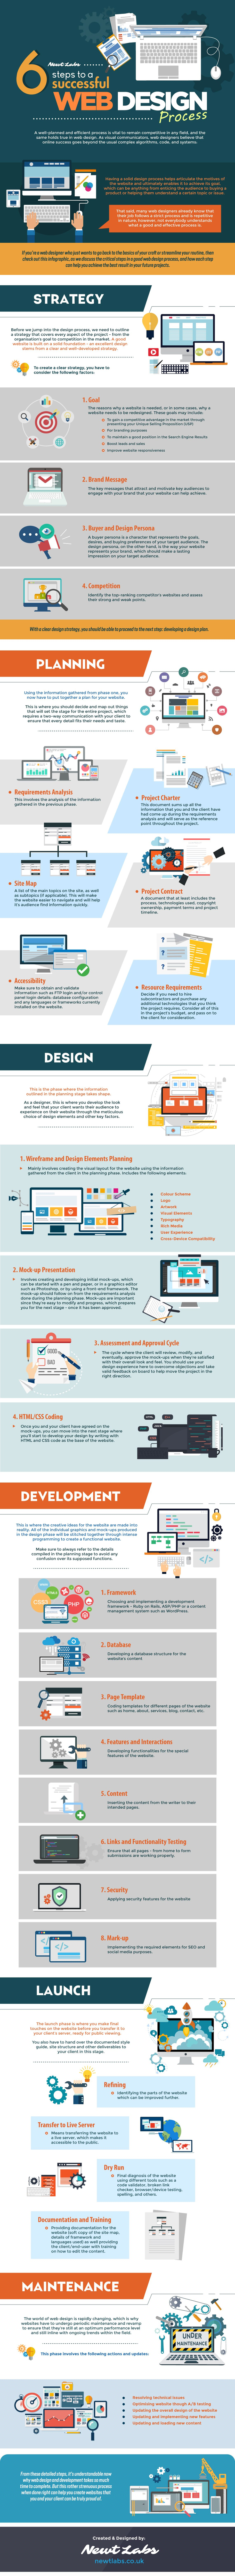 6 steps for creating a successful business web design solution